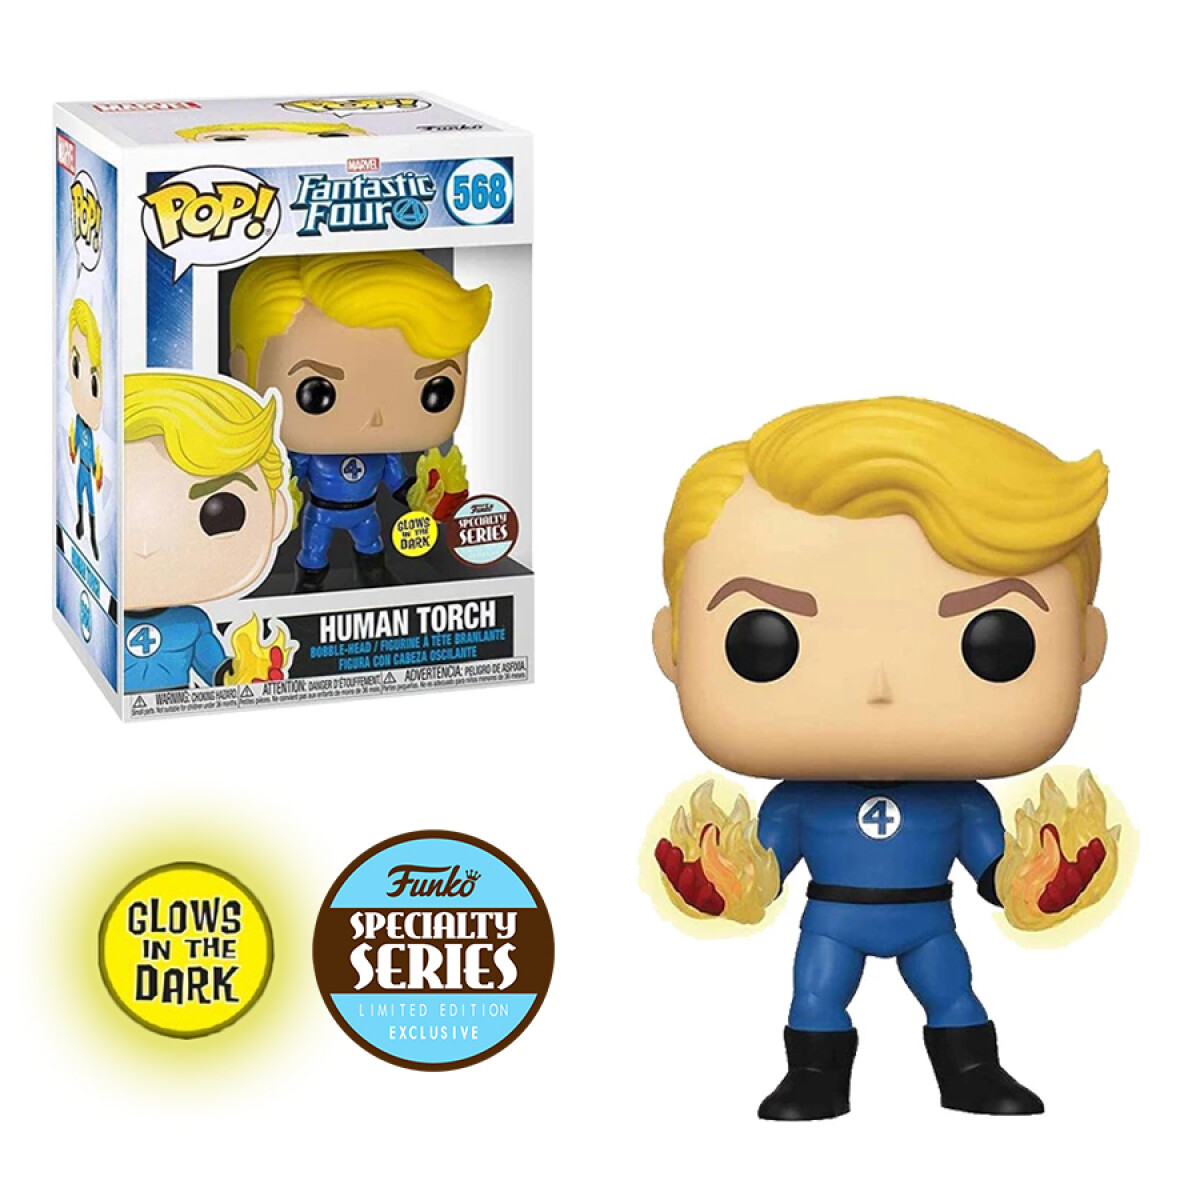 Human Torch Fantastic Four (Specialty Series Glows in the Dark) - 568 